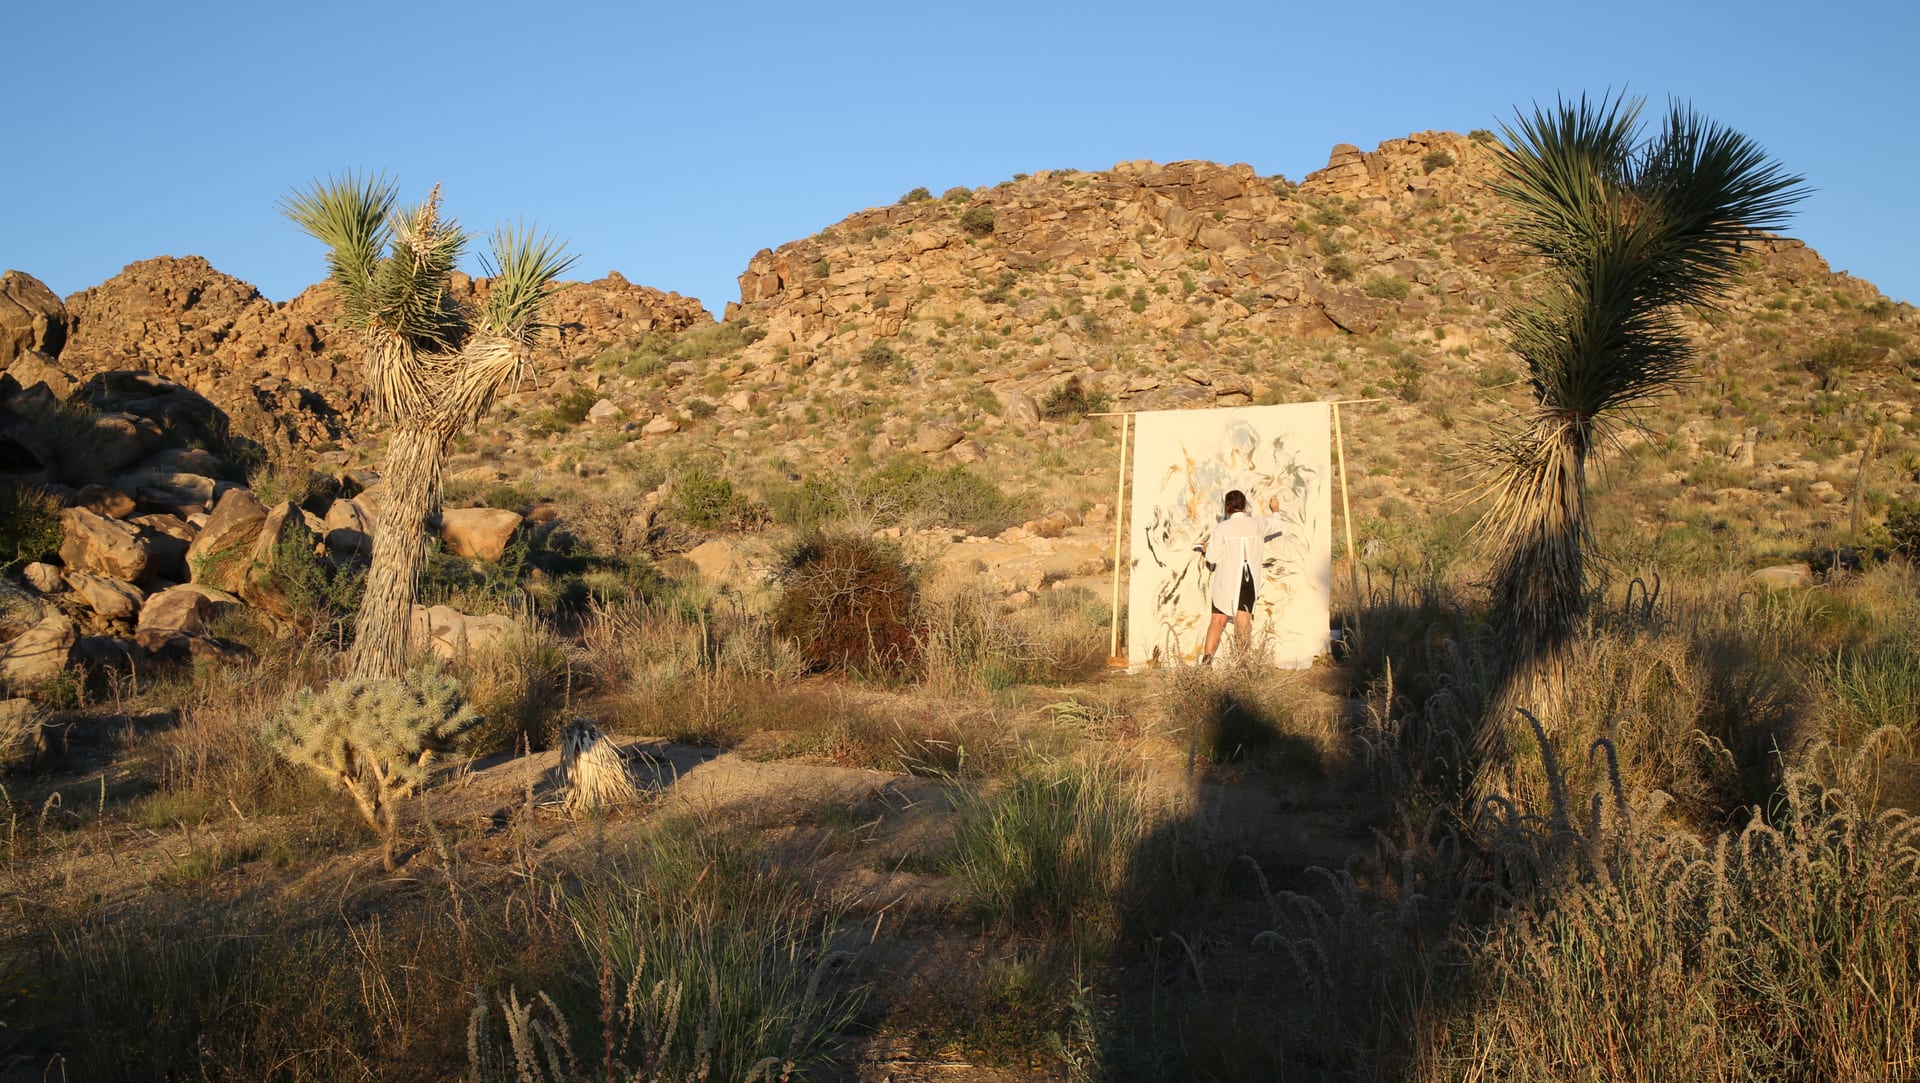 Julia Bennett painting a large canvas held by a standing wood frame in Joshua tree, saturated in gold light just before sunset.